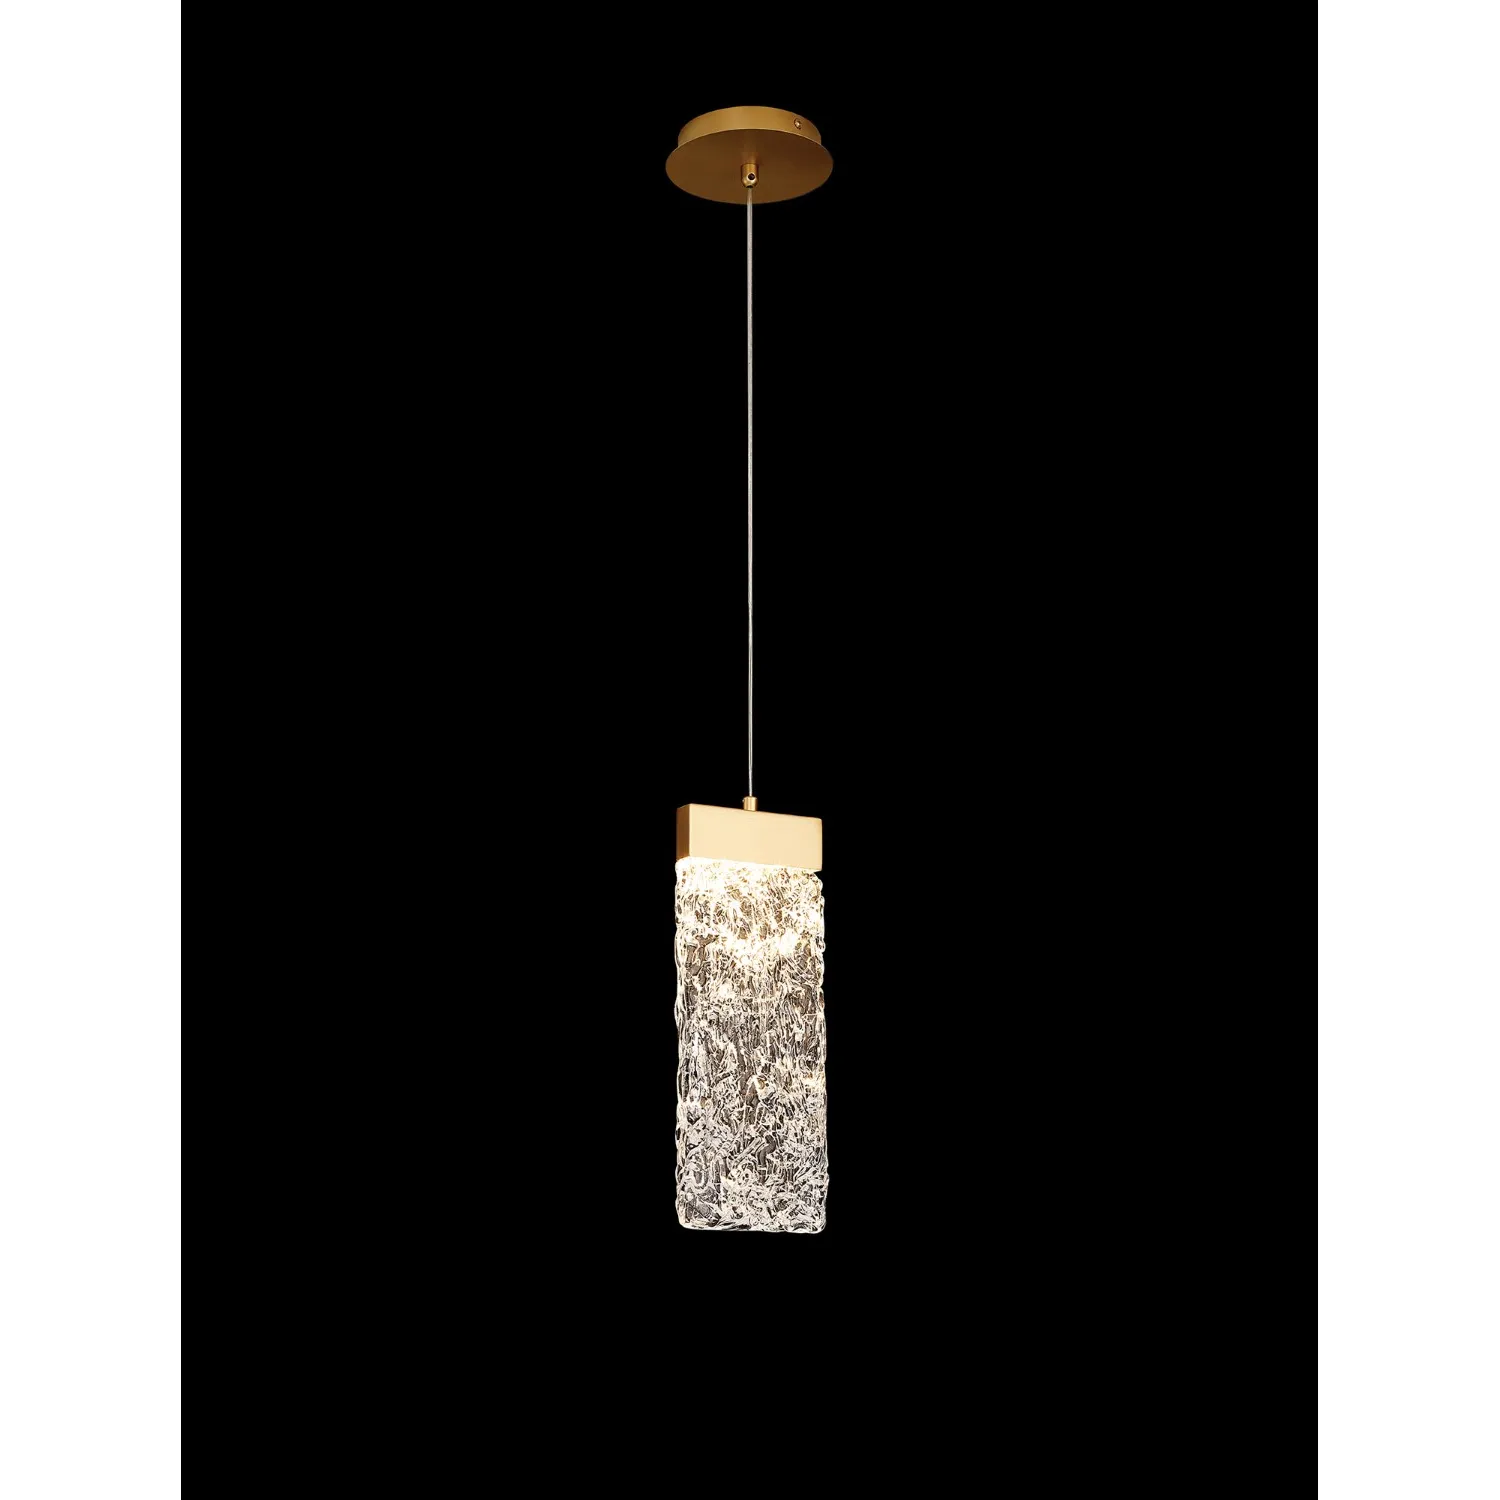 Enfield Large Pendant 2m, 1 x 4.5W LED, 3000K, 160lm, Painted Brushed Gold, 3yrs Warranty